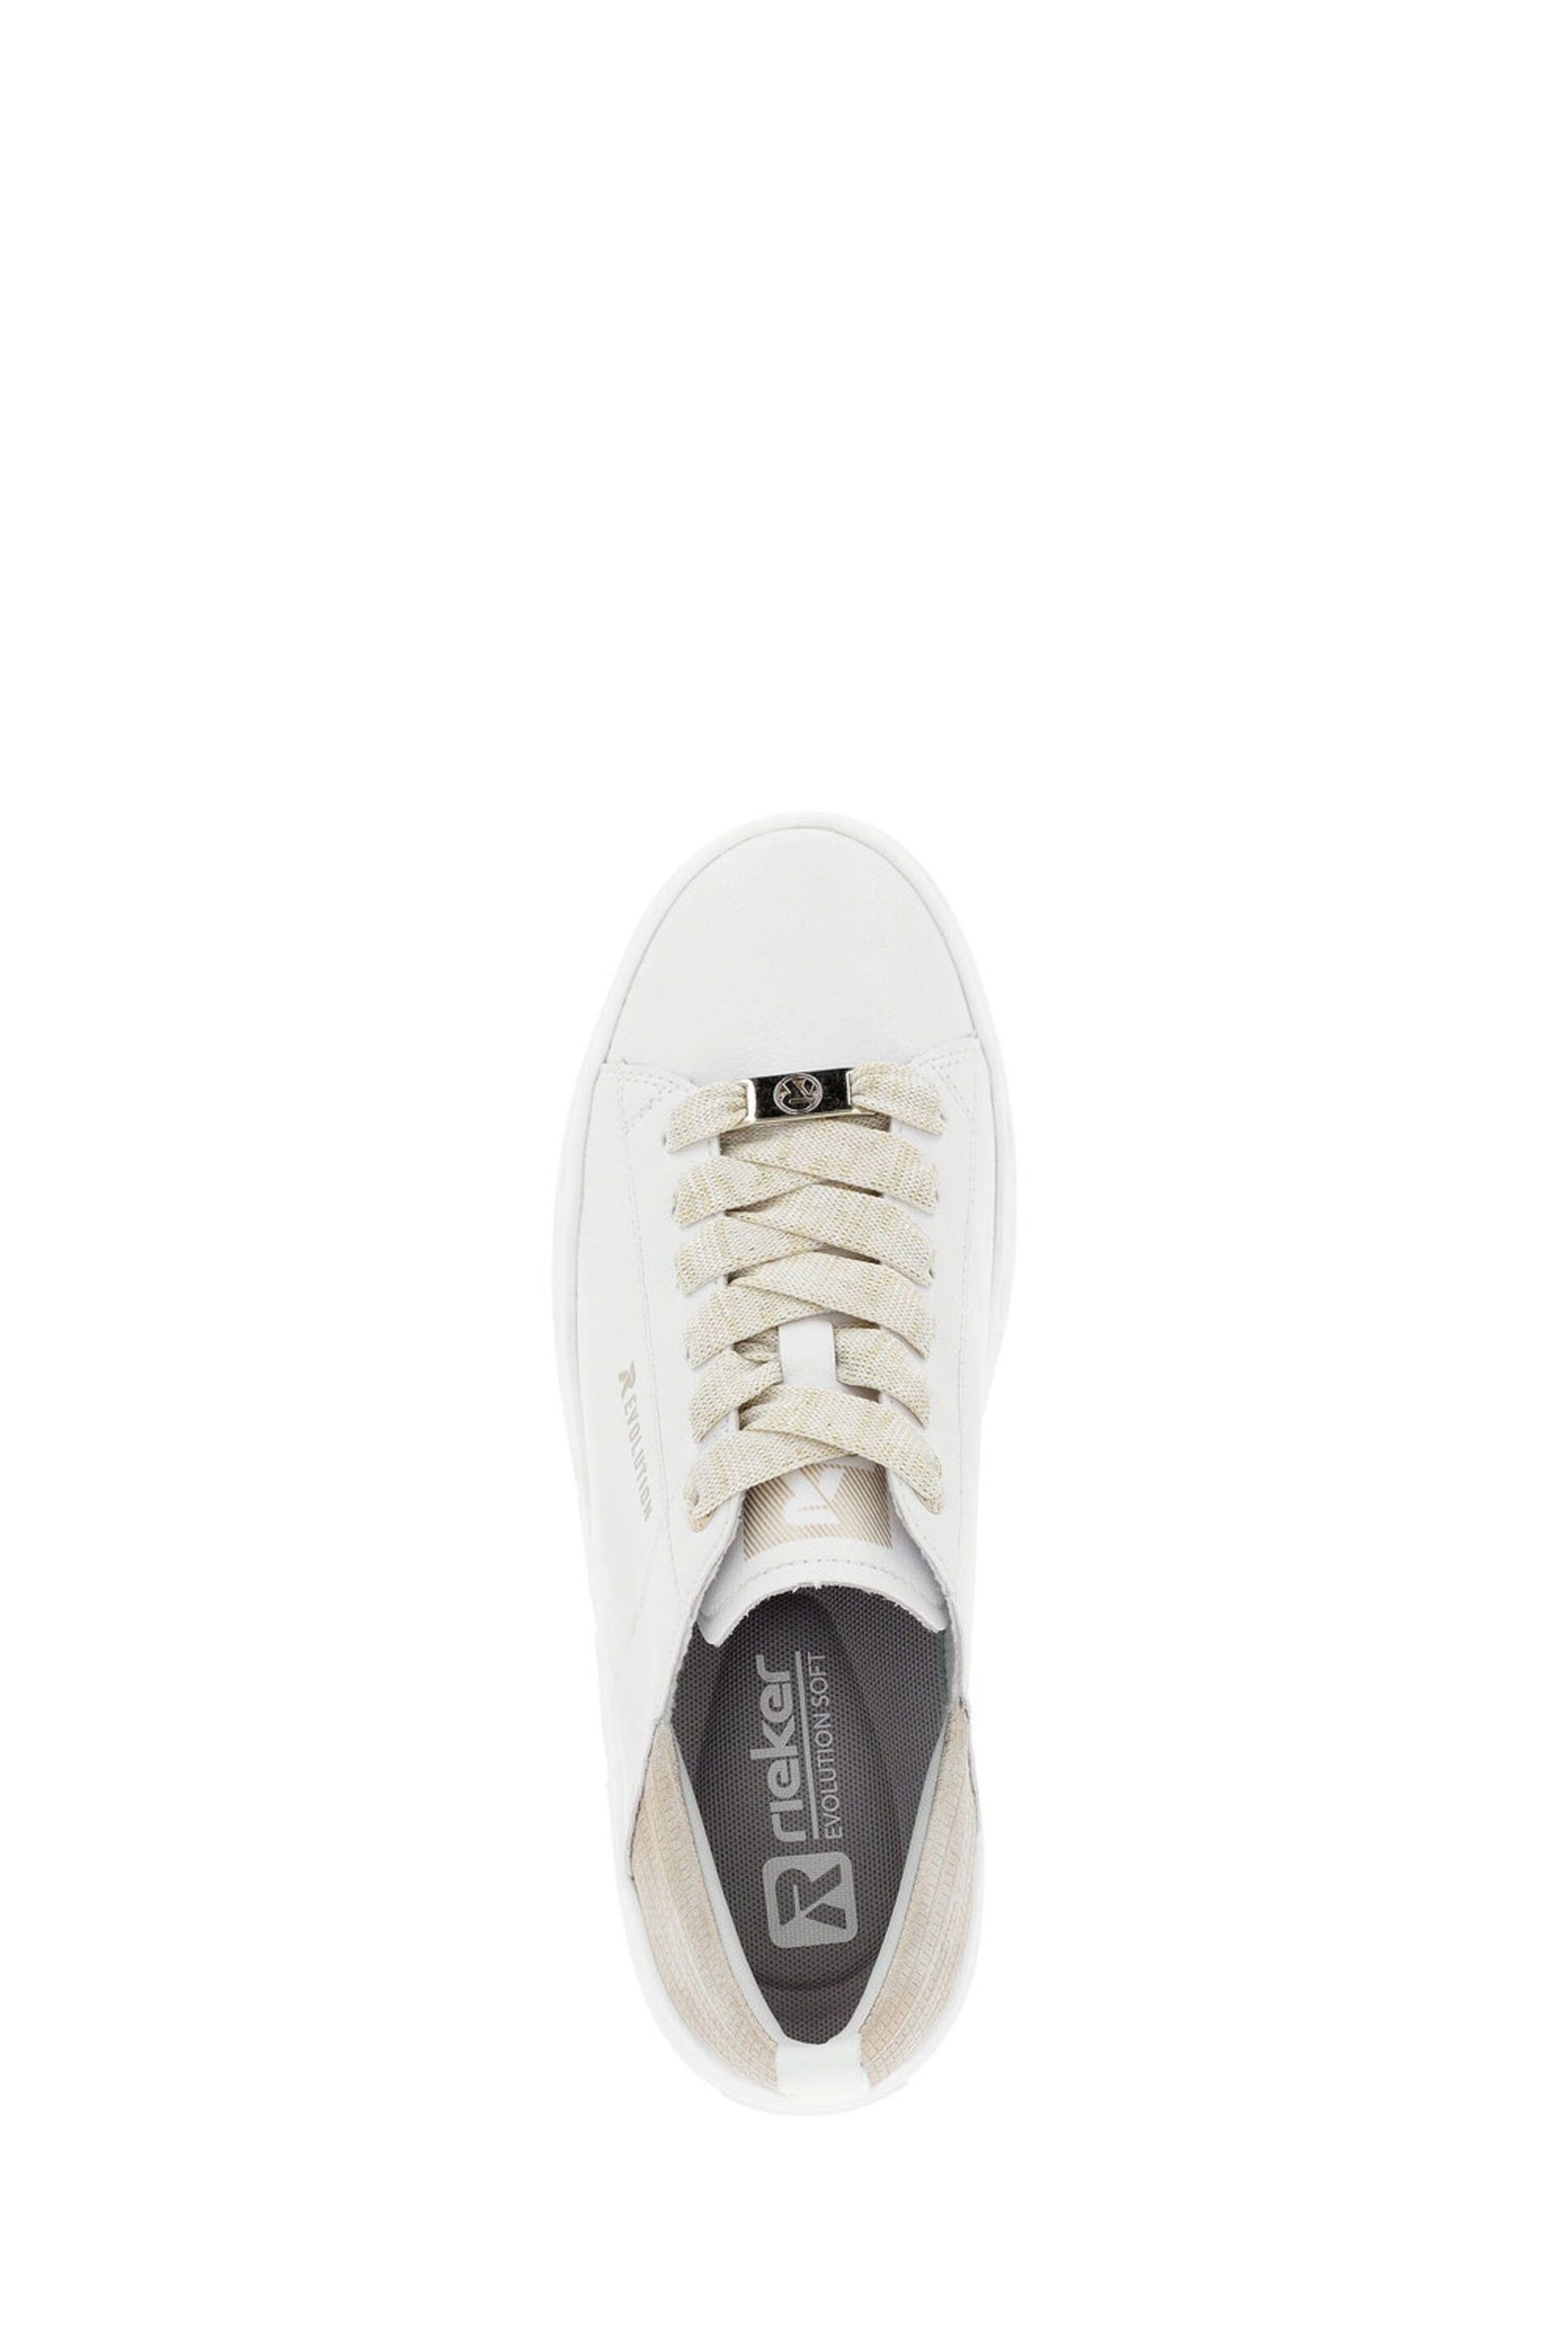 Rieker Womens Evolution Lace-Up Trainers - Image 8 of 10